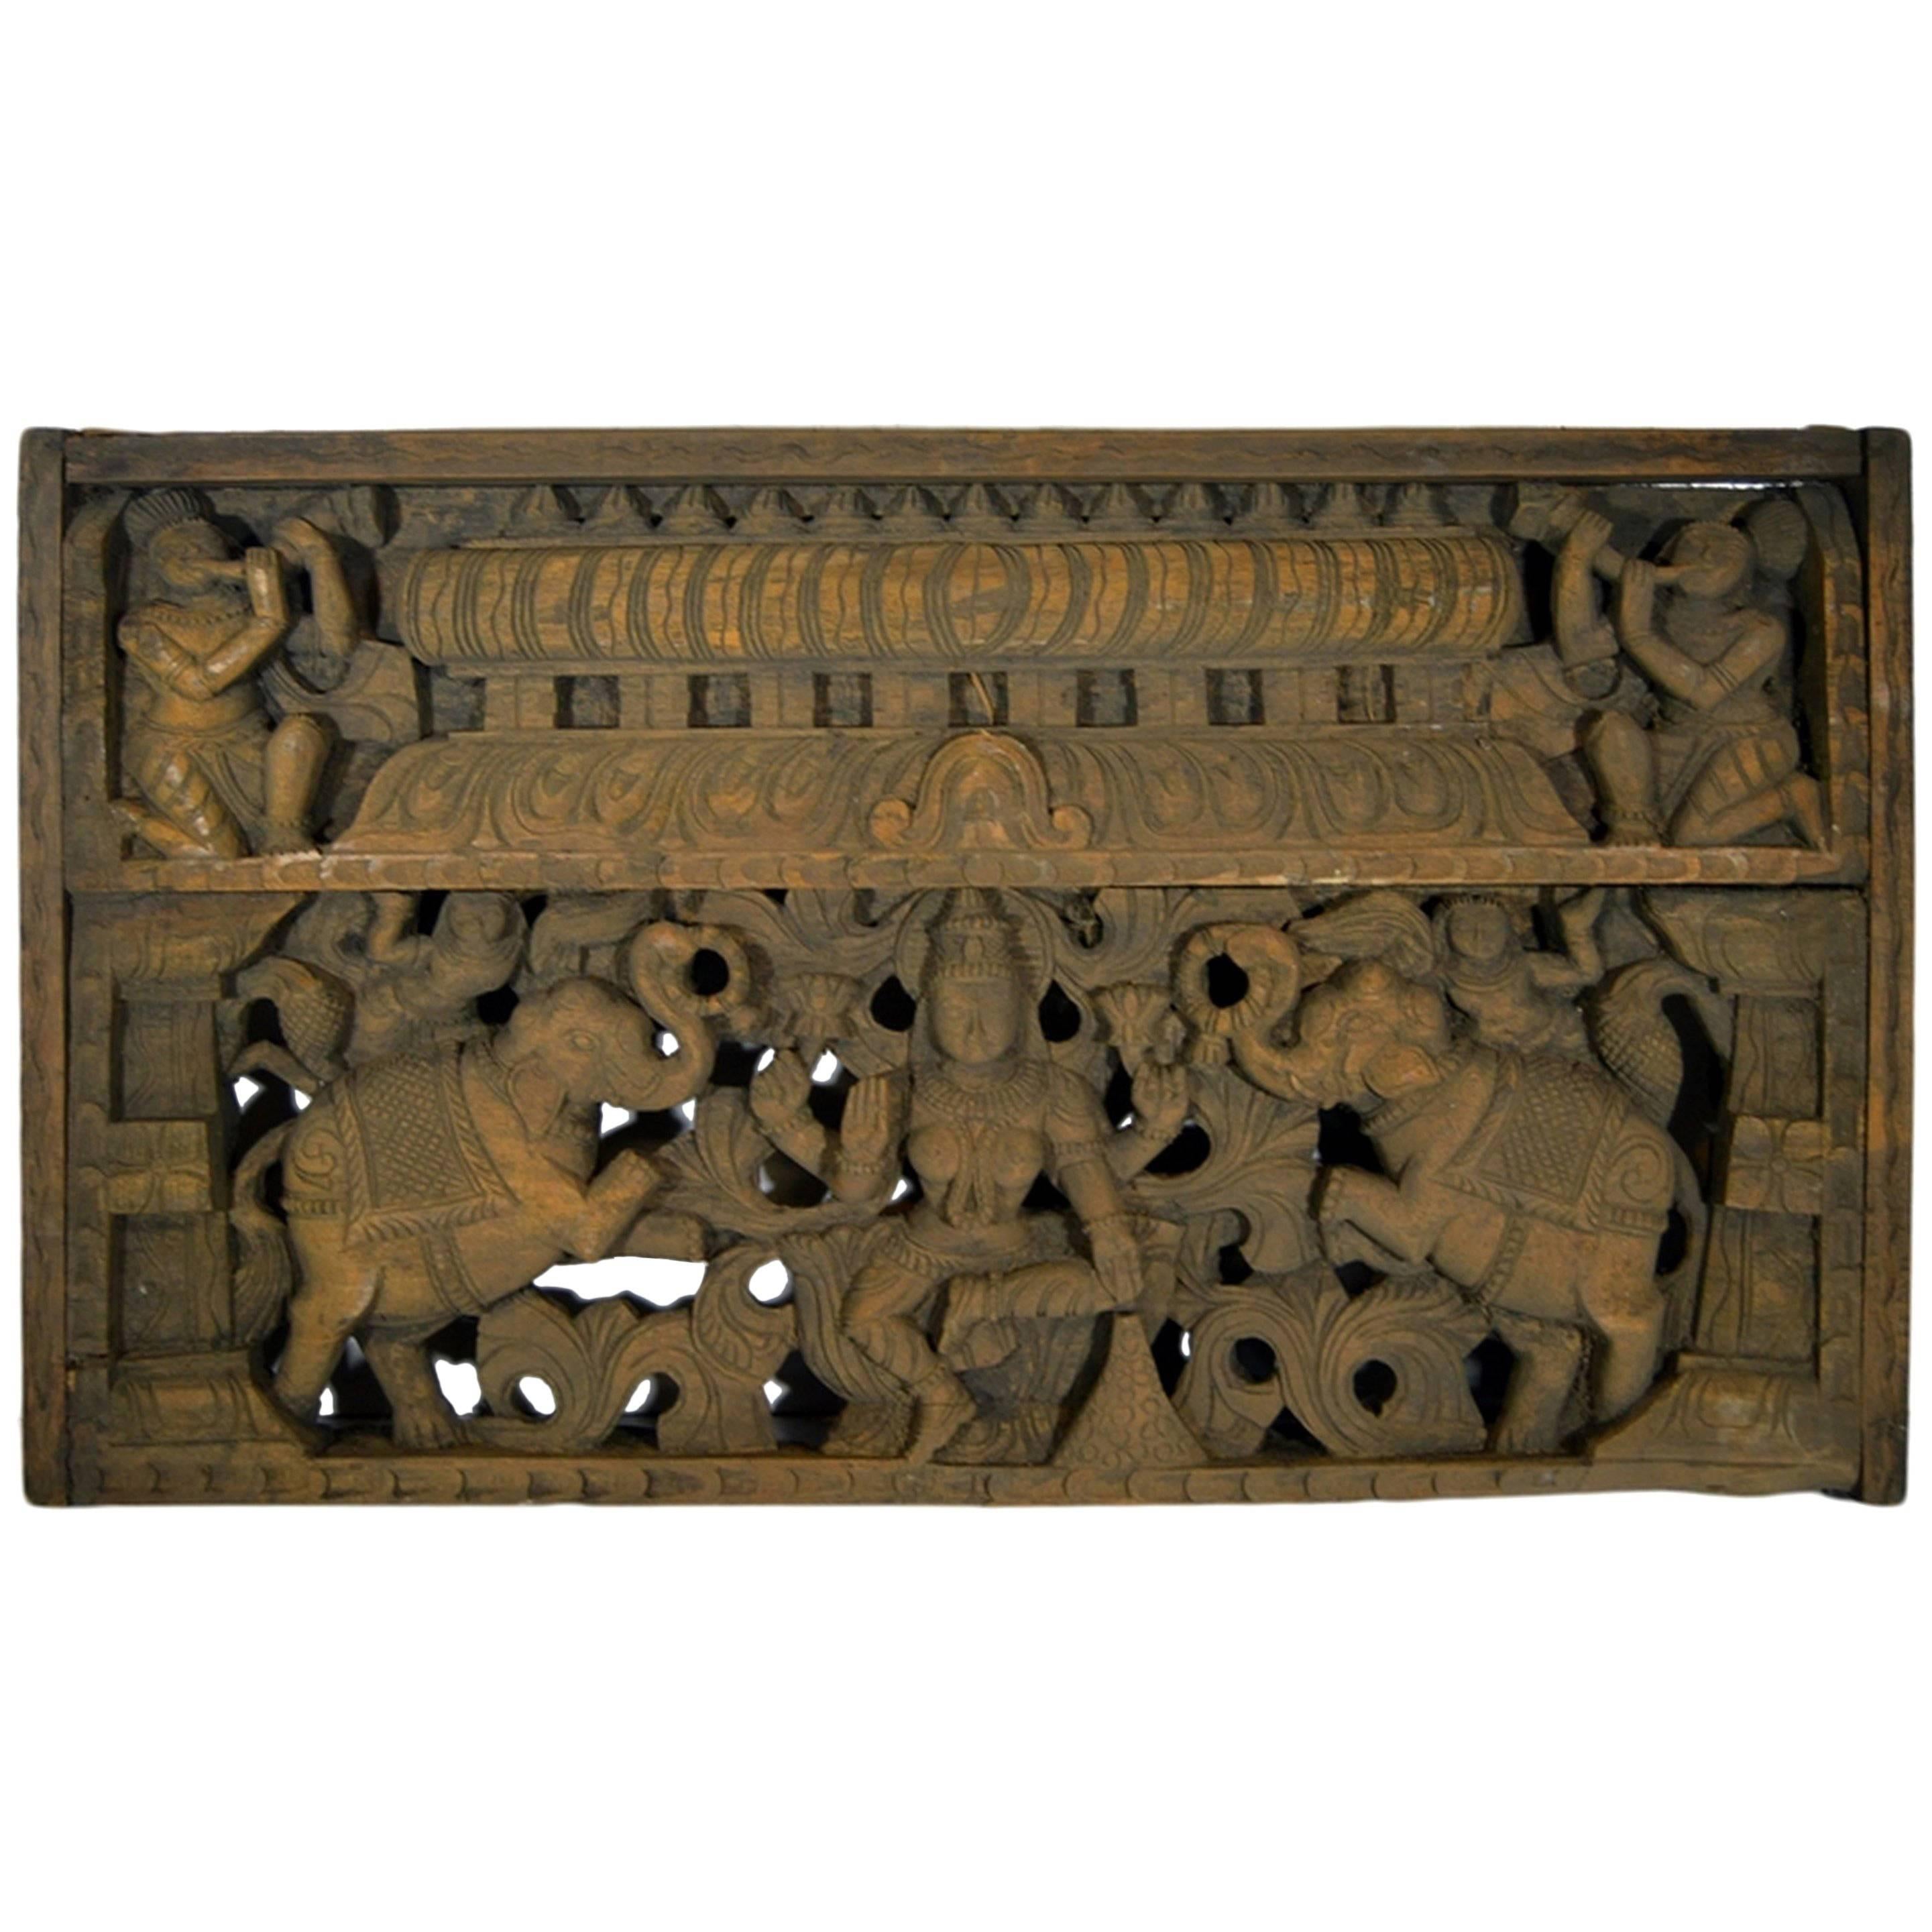 Antique Indian Hand-Carved Sheesham Religious Temple Plaque, Early 20th Century For Sale